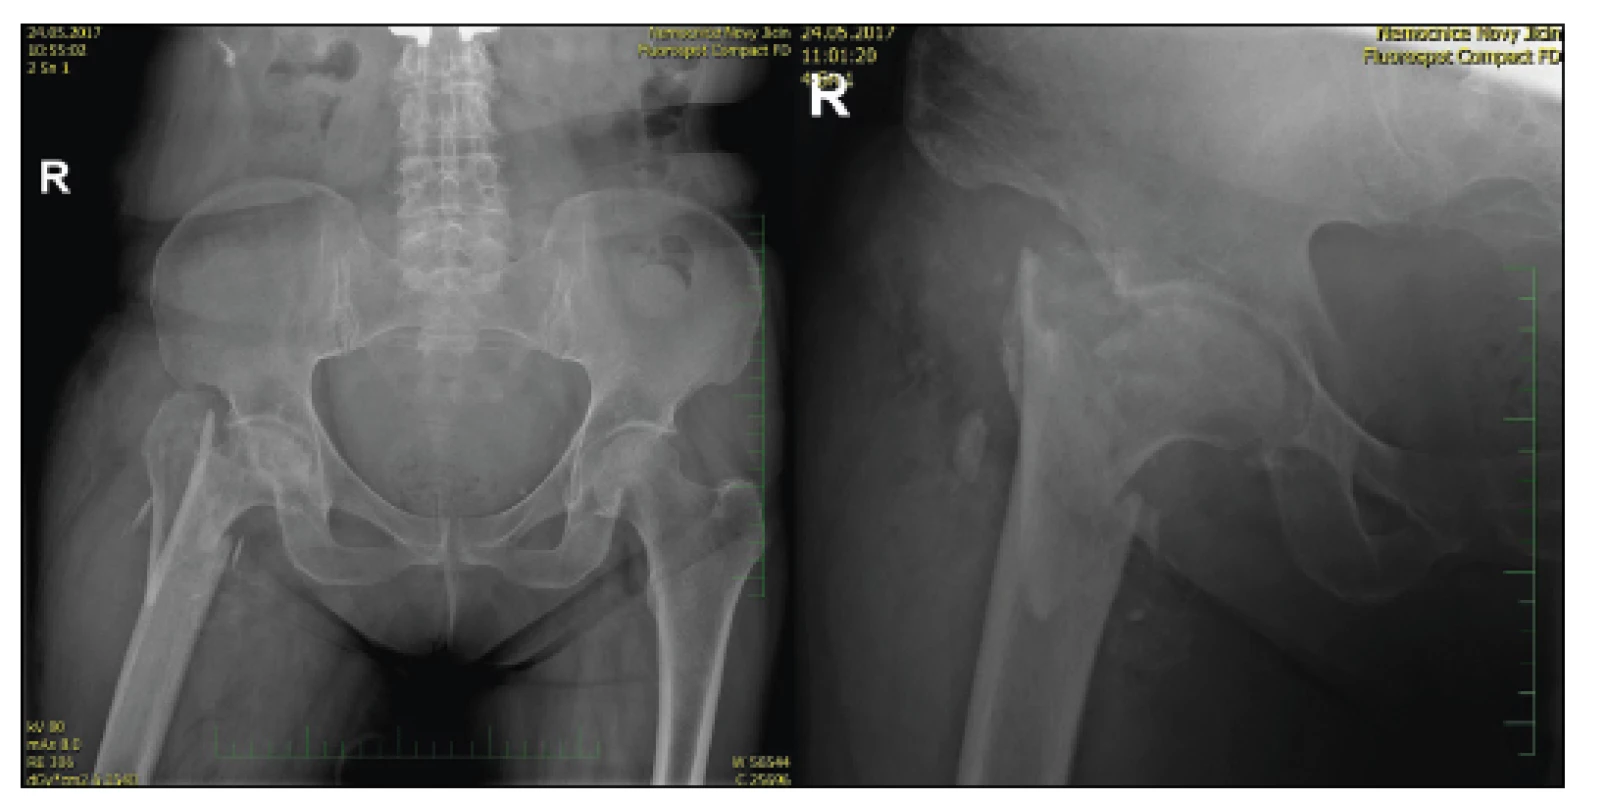 70-year-old female with comminuted fracture of the trochanteric
massive and necrosis of the femoral head, trauma X-ray